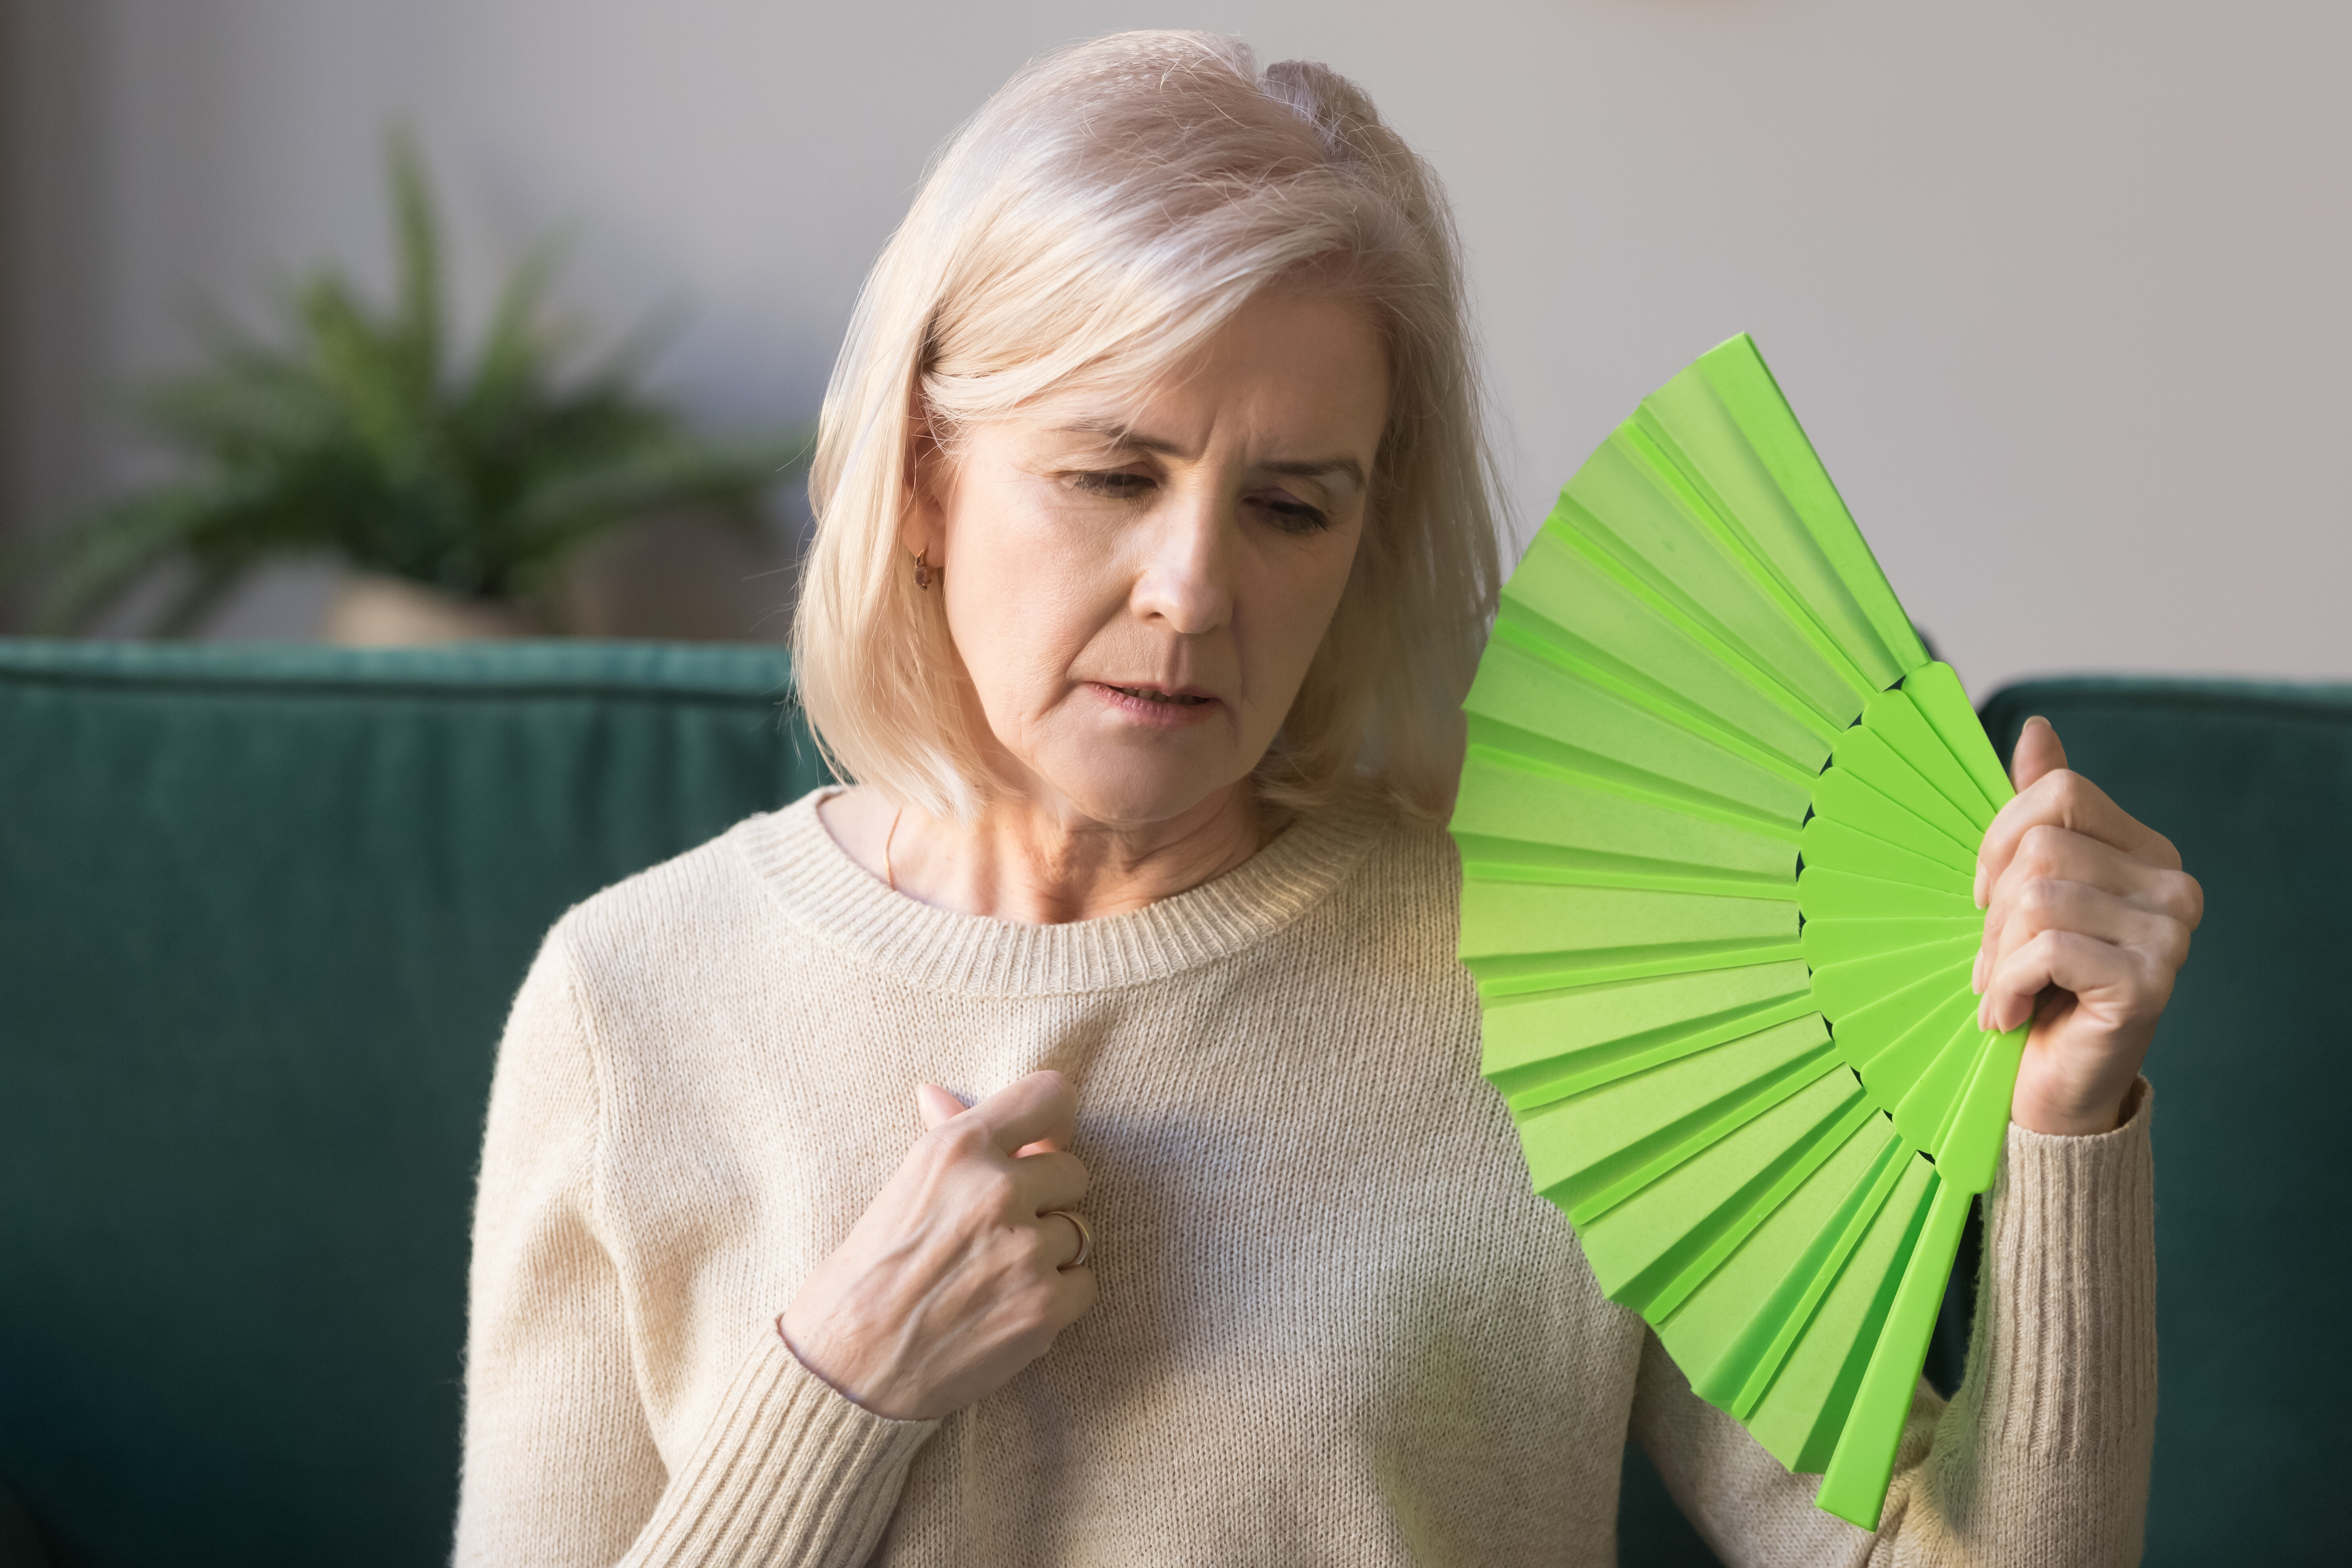 What Predicts Hot Flashes Years After Menopause?